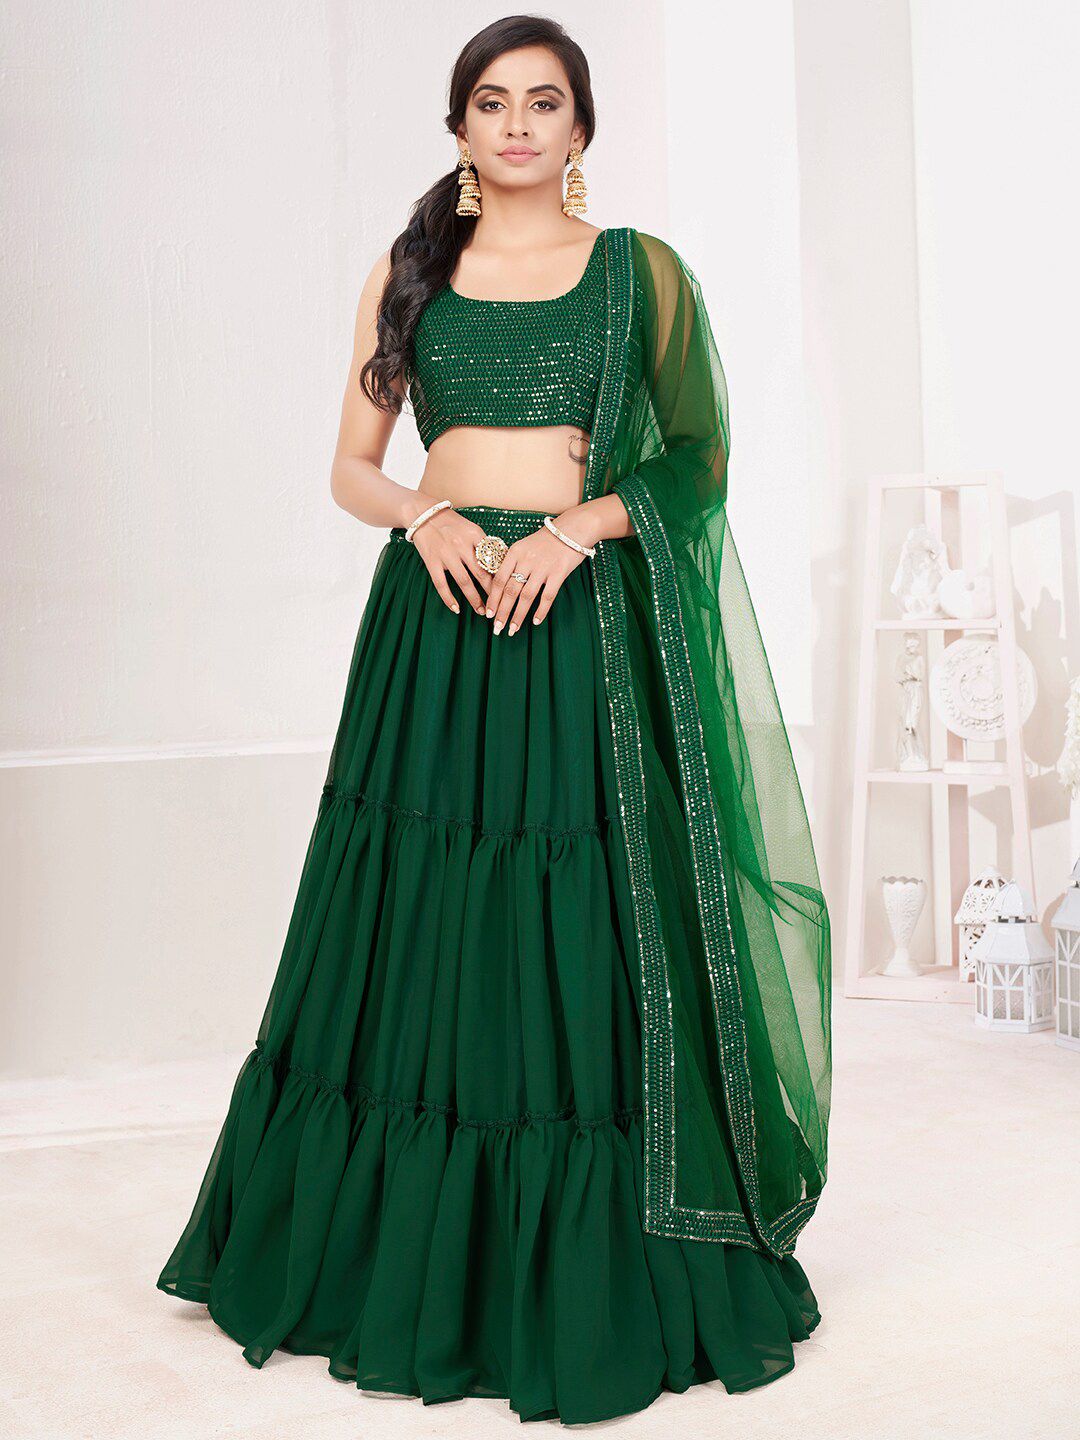 SHOPGARB Green & Gold-Toned Embellished Semi-Stitched Lehenga & Unstitched Blouse With Dupatta Price in India